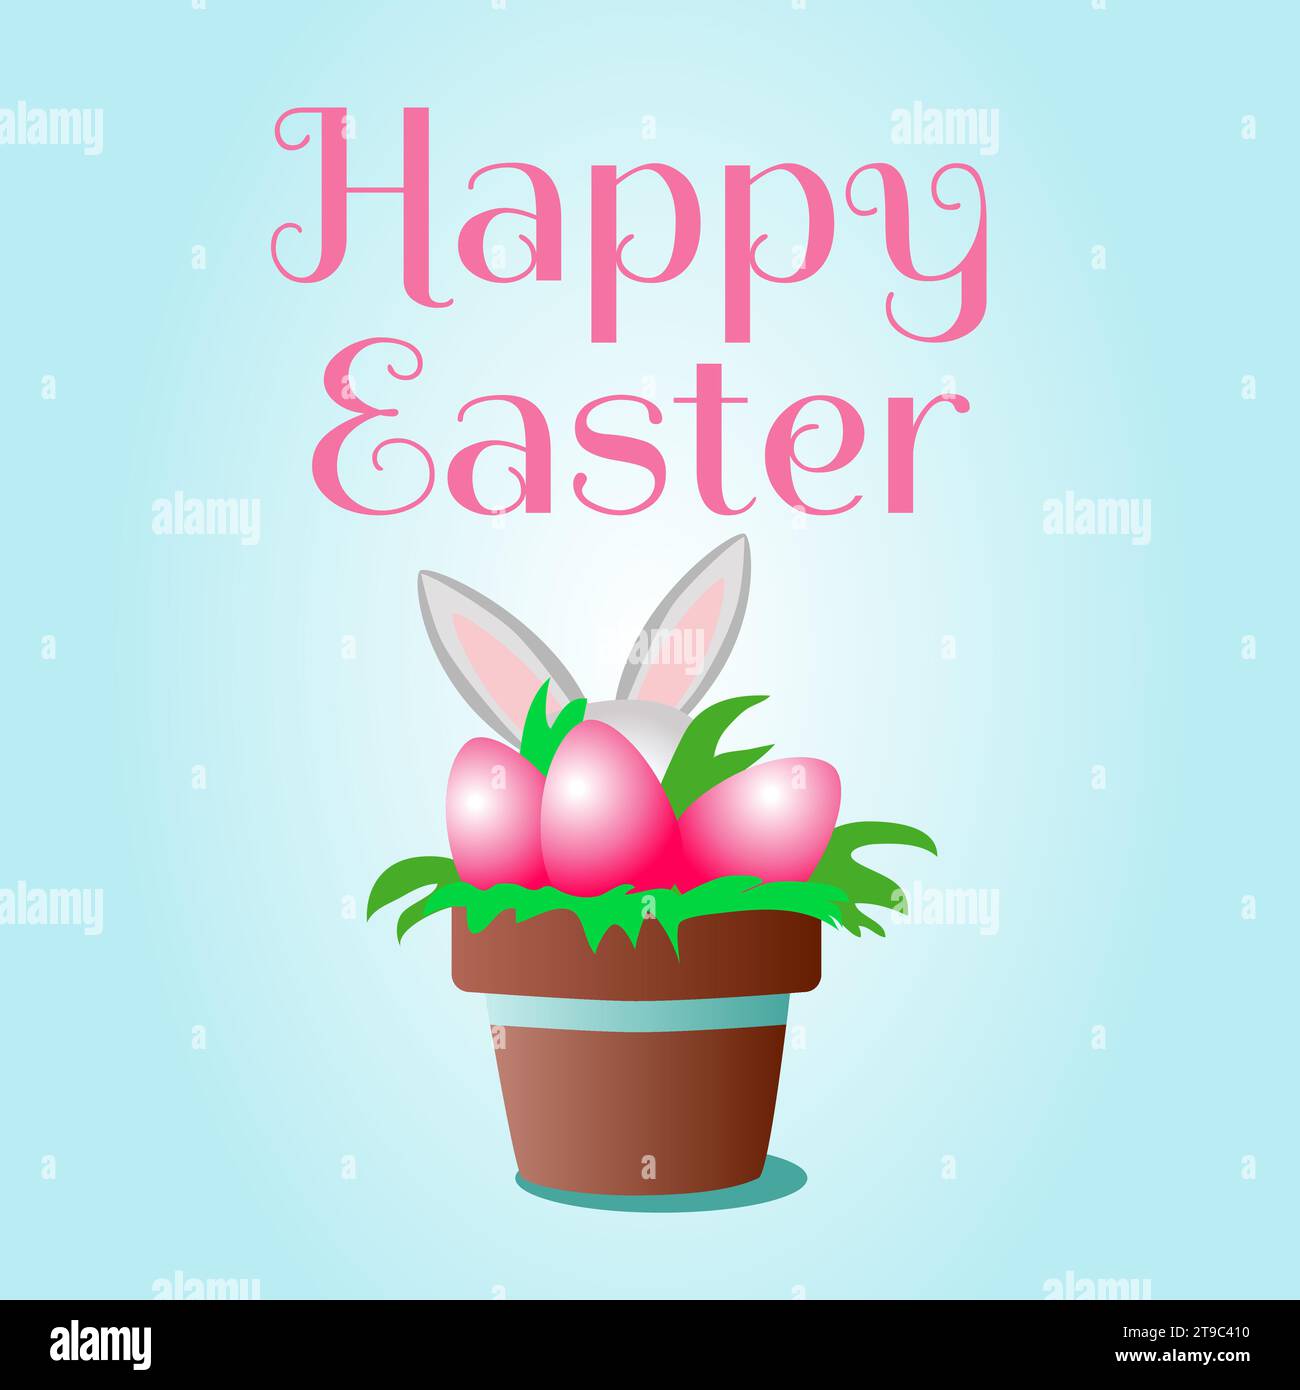 Ceramic pot with grass and decorative eggs on blue sky background and text Happy Easter. Vertical holiday banner. Stock Vector